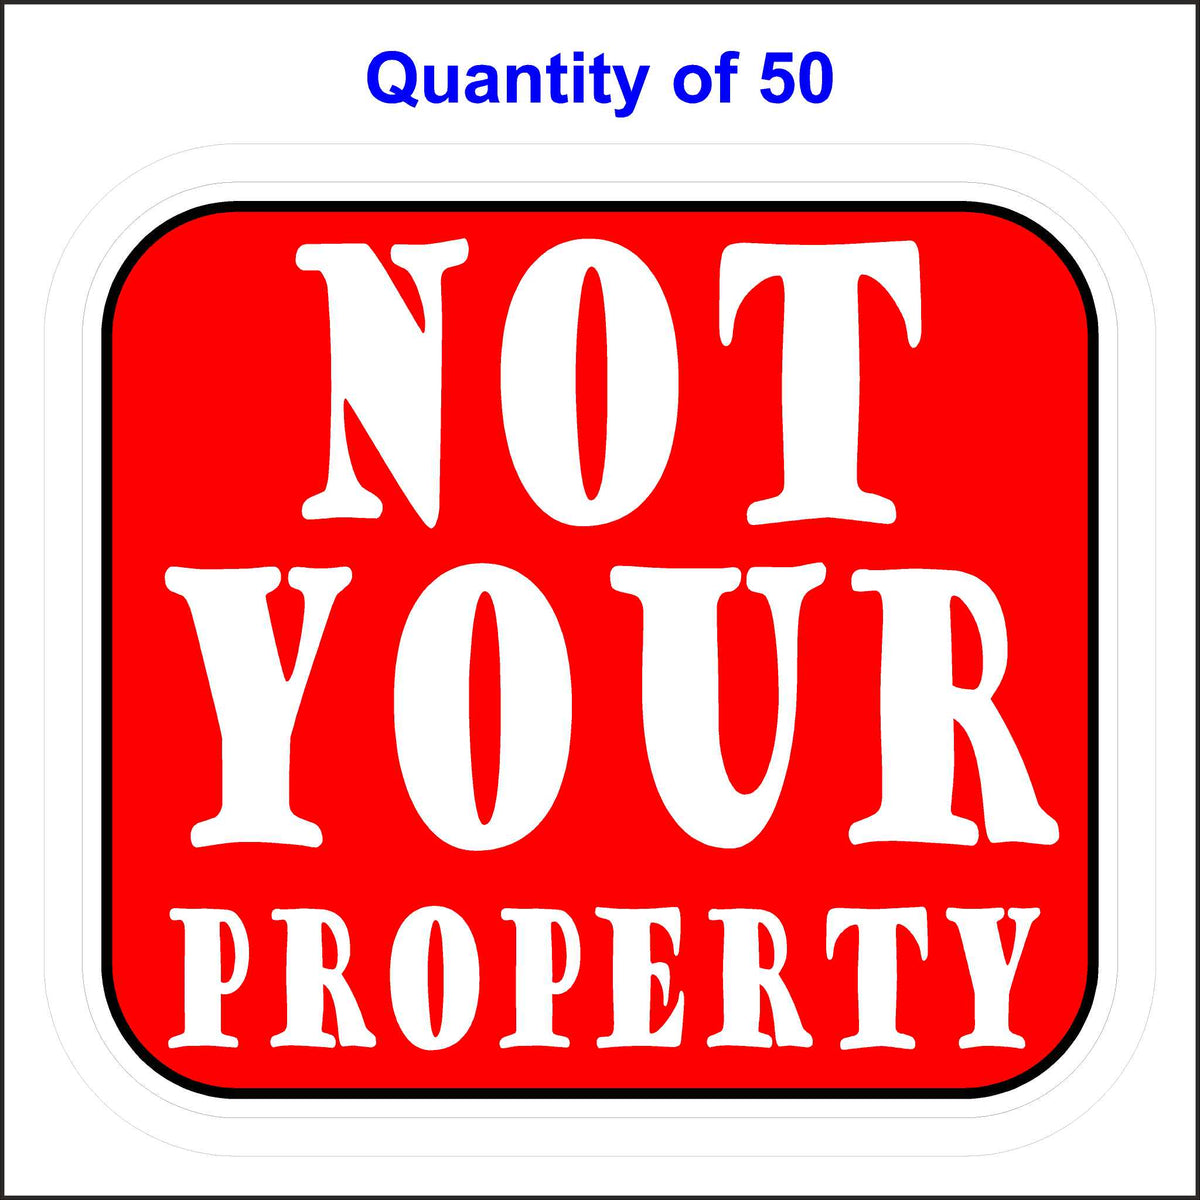 Not Your Property Sticker. Red Background With White Lettering. 50 Quantity.